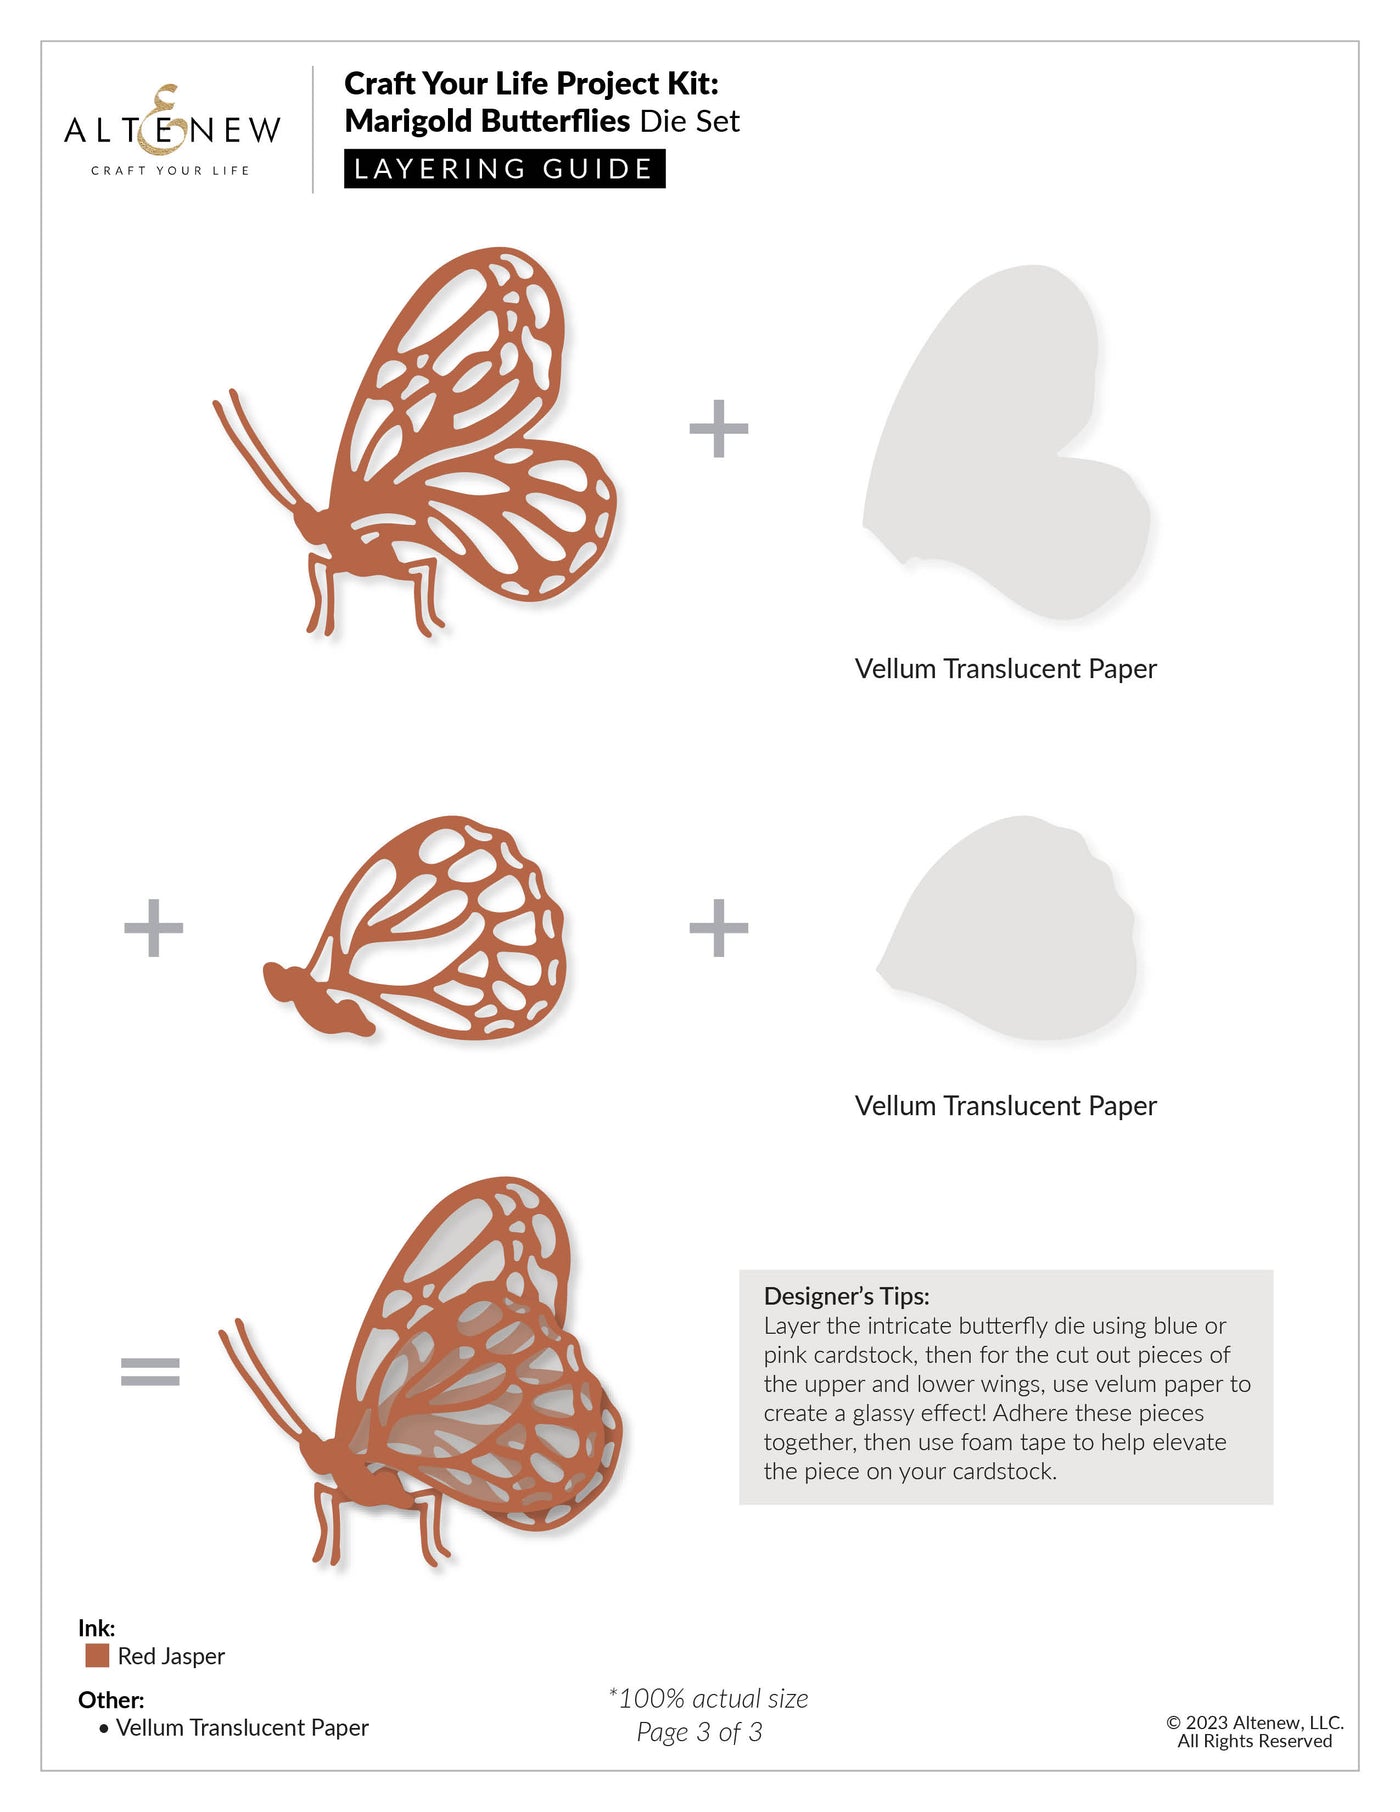 Craft Your Life Project Kit Craft Your Life Project Kit: Marigold Butterflies